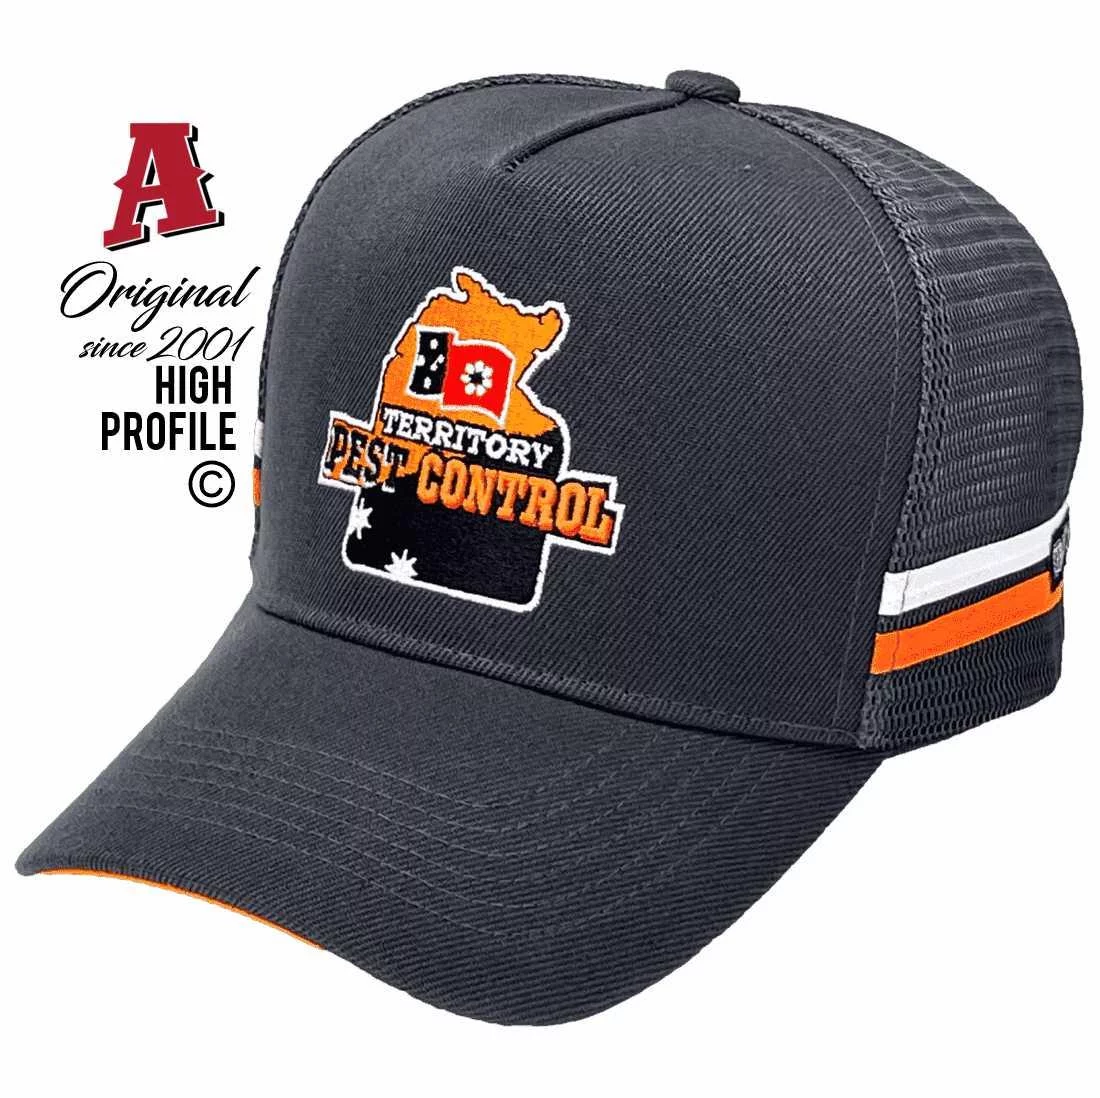 Territory Pest Control Alice Springs NT Midrange Aussie Trucker Hats HeadFit Crown flat embroidery Snapback Charcoal